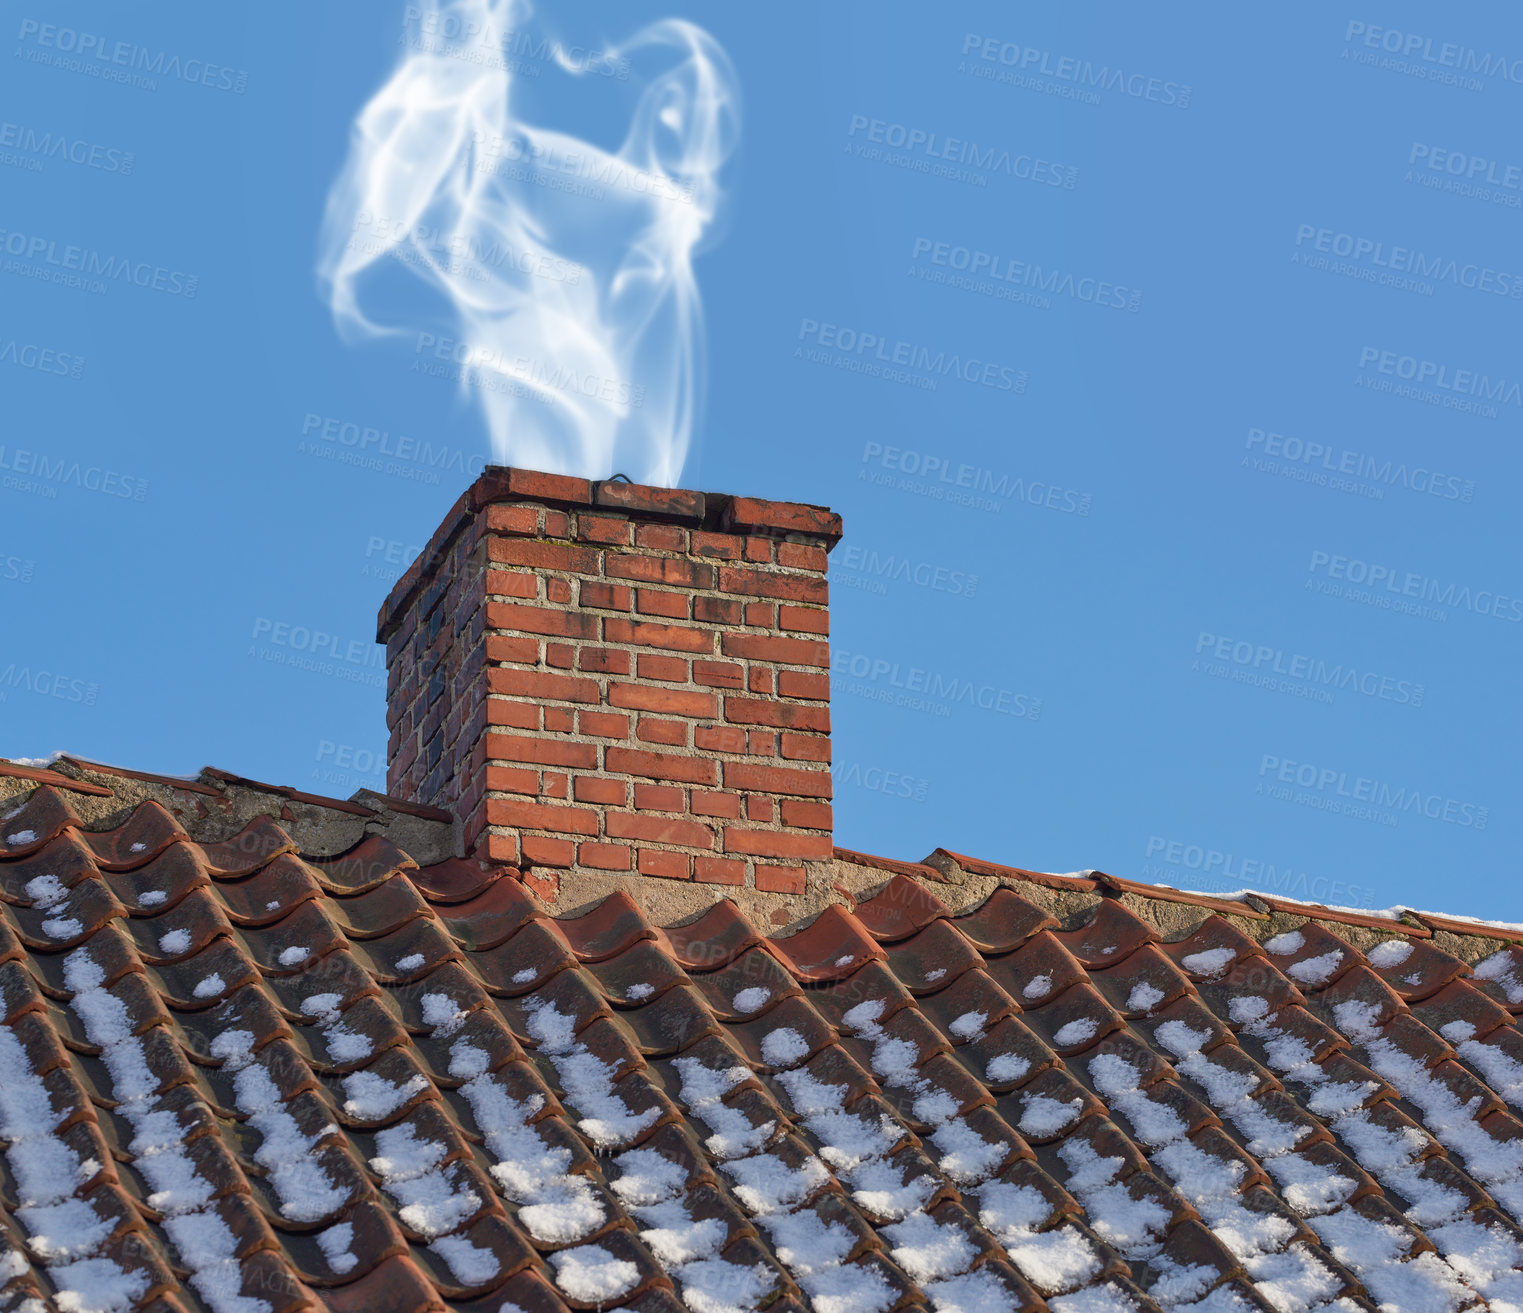 Buy stock photo Landscape of chimney blowing smoke on house rooftop exterior design in Denmark during winter. Close up of old architecture redbrick air vent for removing heat and smoke from fireplace with blue sky